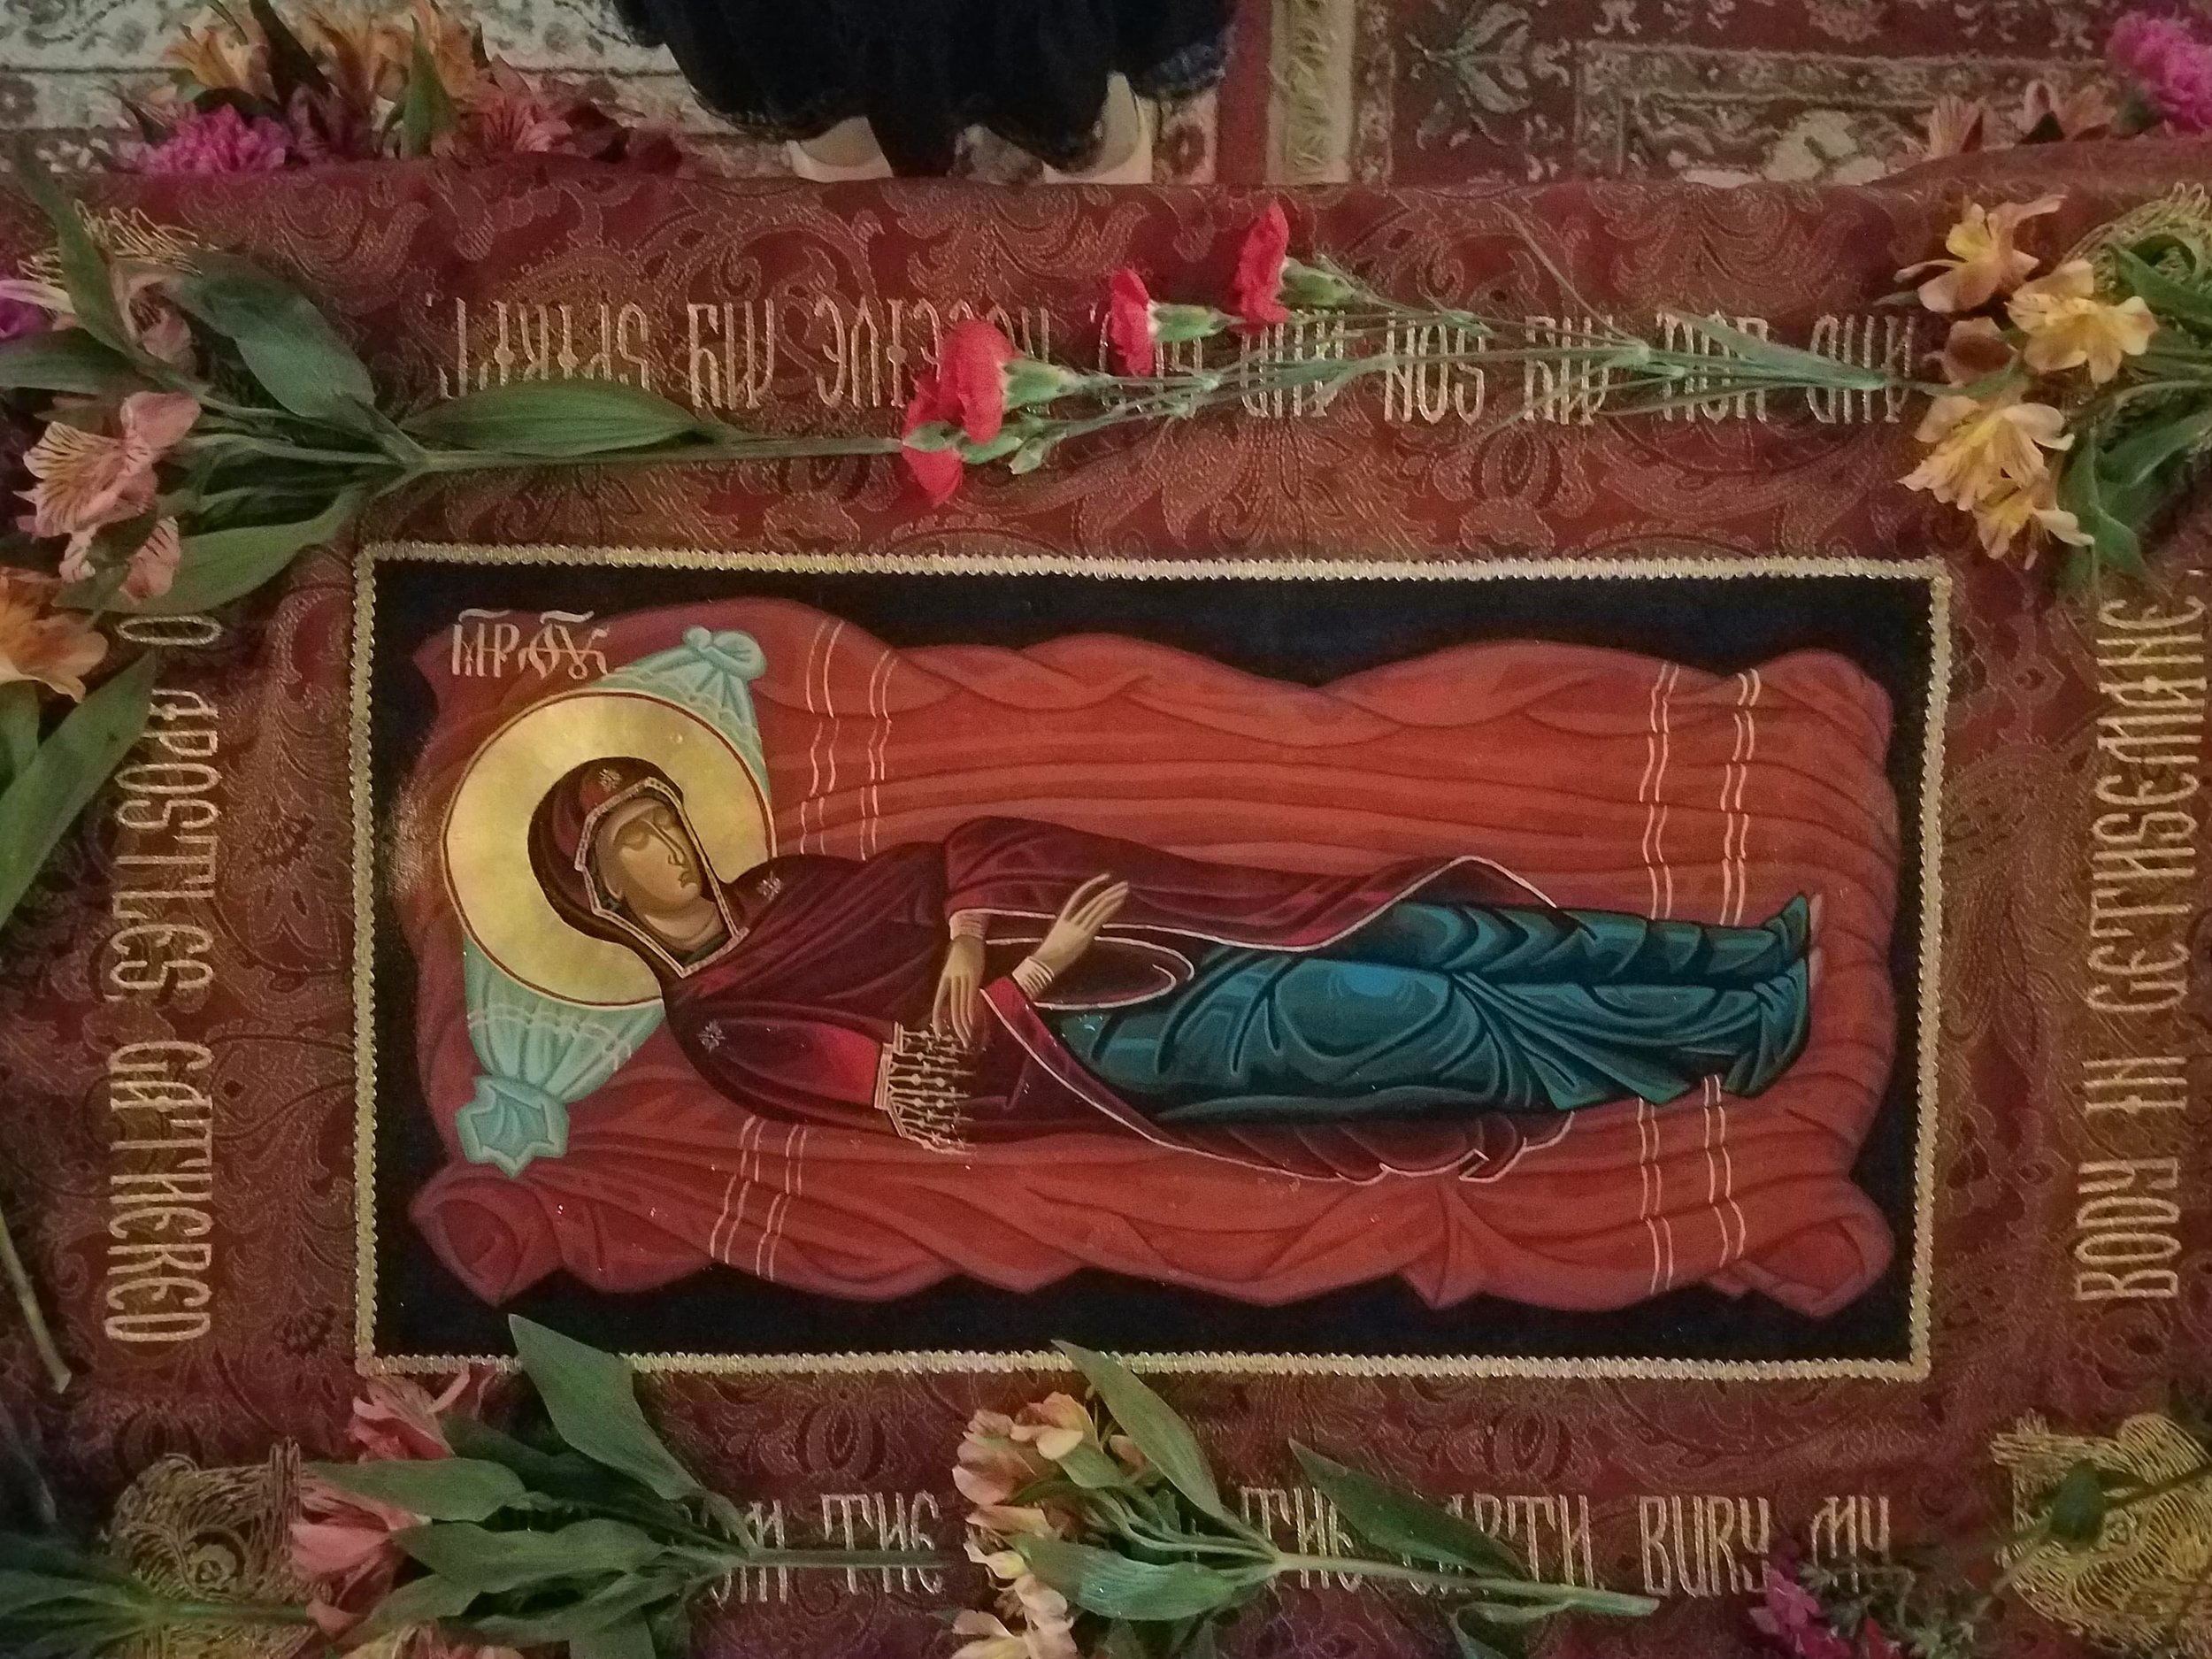 Feast of the Dormition 2019